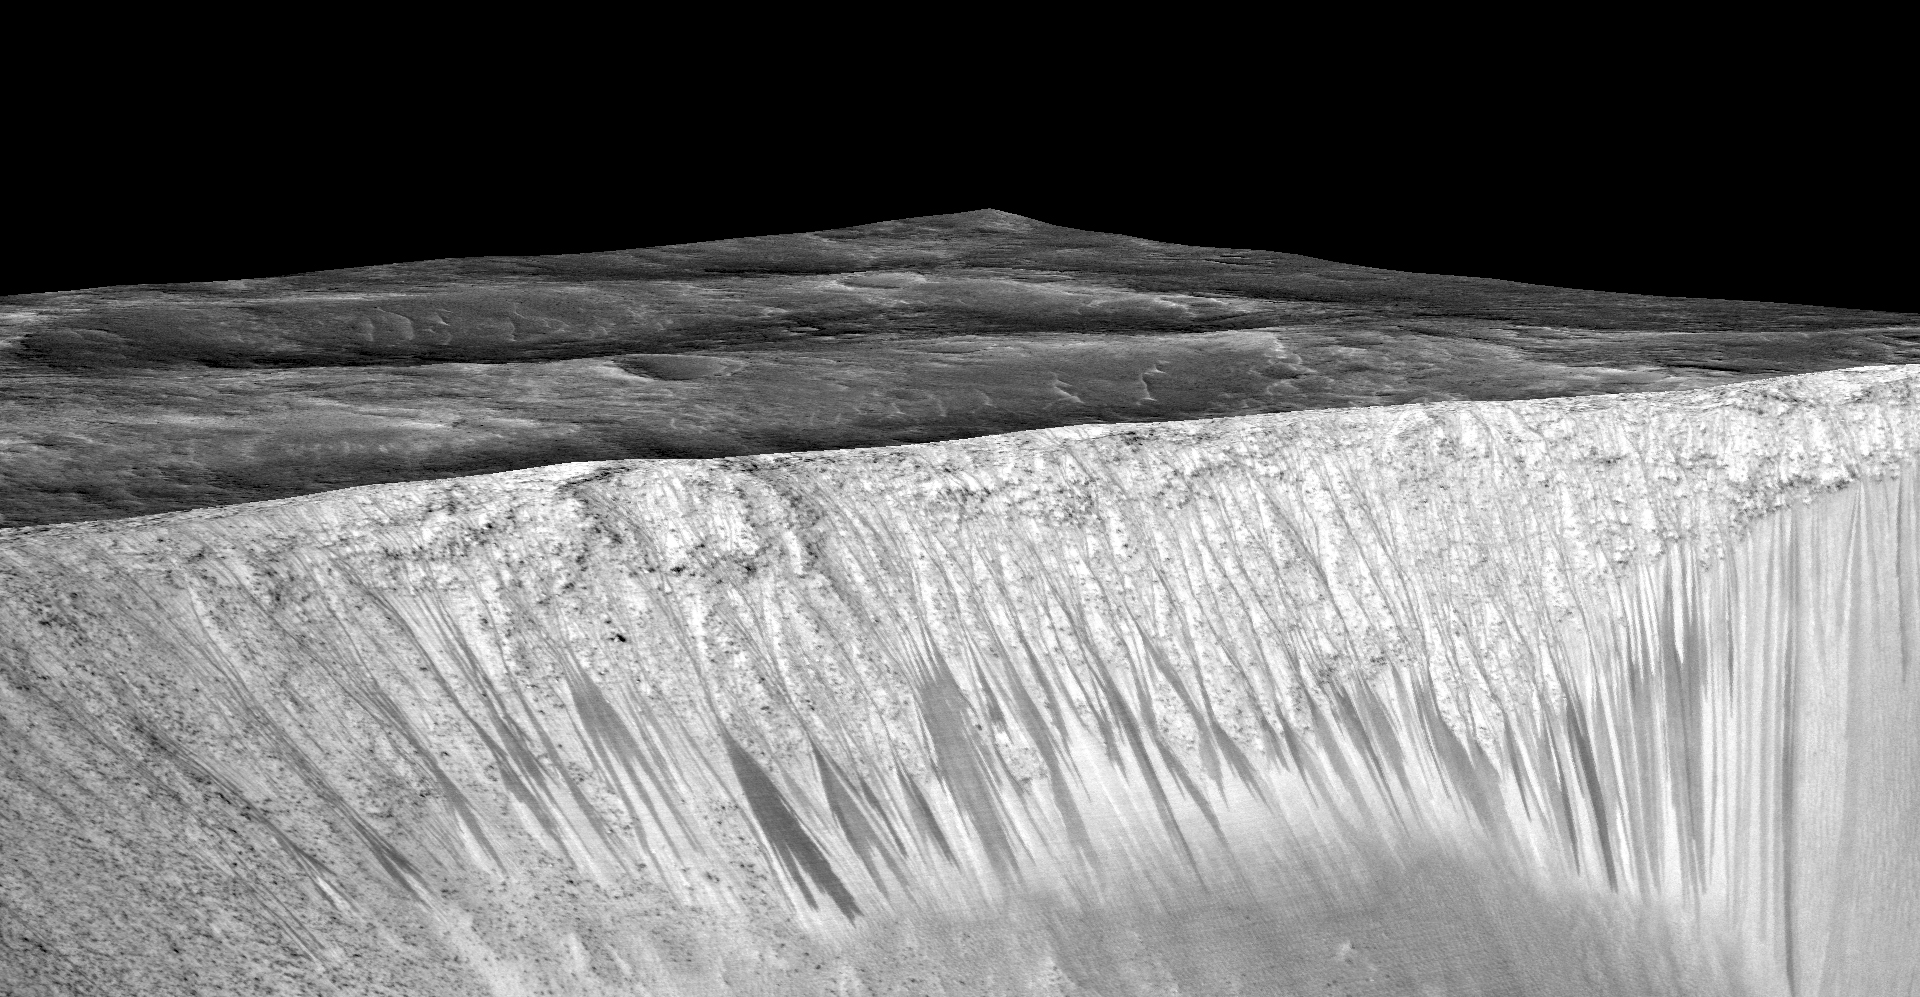 Dark narrow streaks called recurring slope lineae flowing out of the walls of Garni Crater on Mars. The streaks are up to a few hundred meters in length. Photo is color enhanced. Image credit: NASA/JPL/University of Arizona.